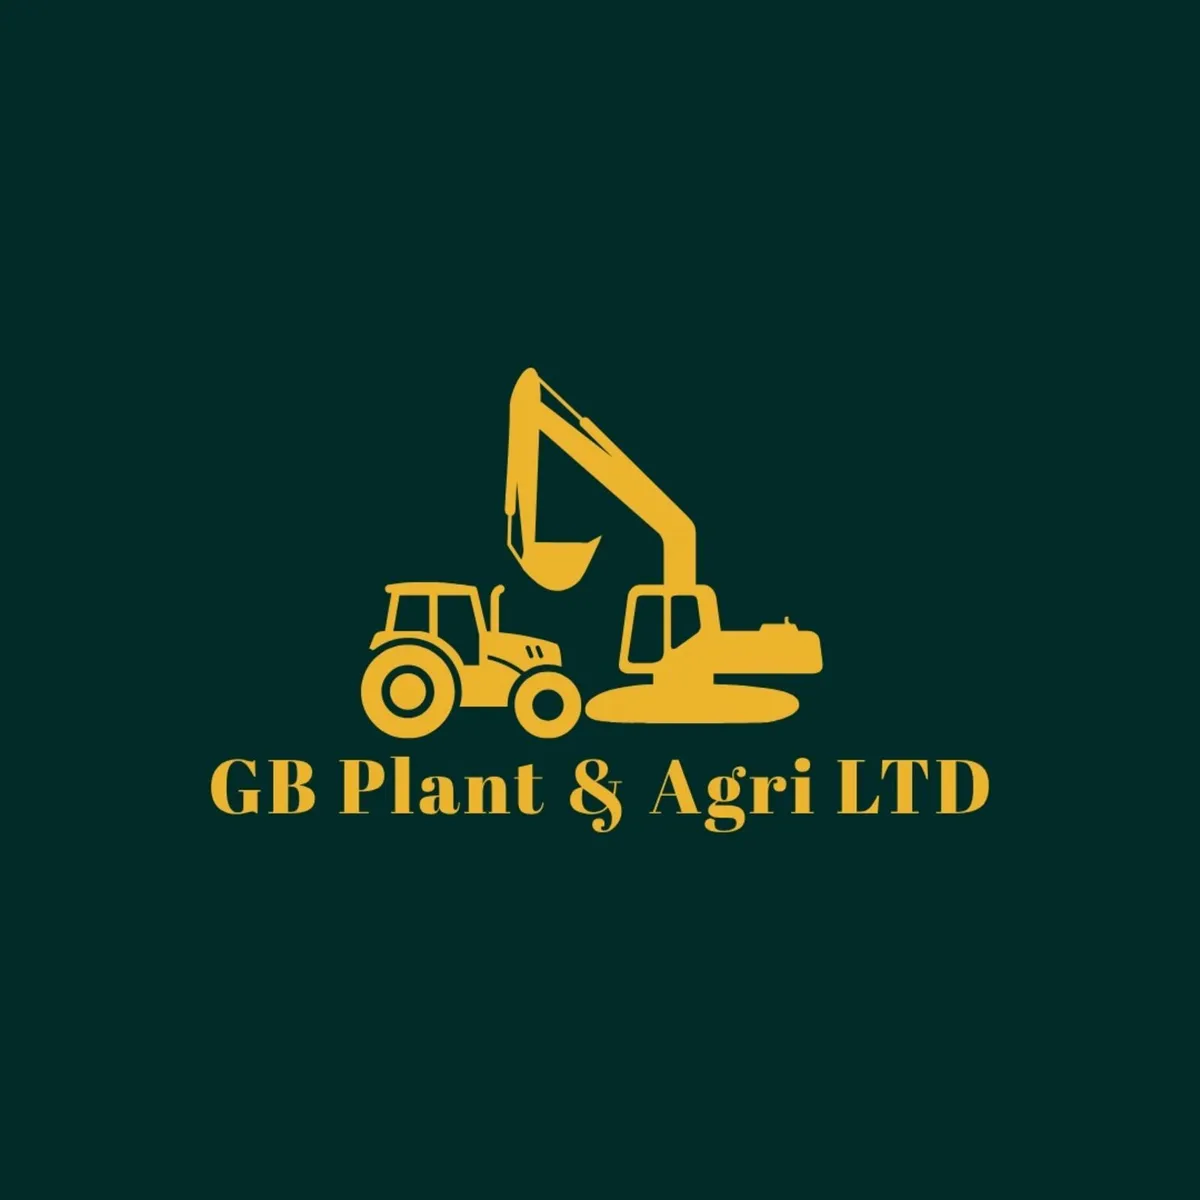 Plant hire groundwork’s contractor - Image 1